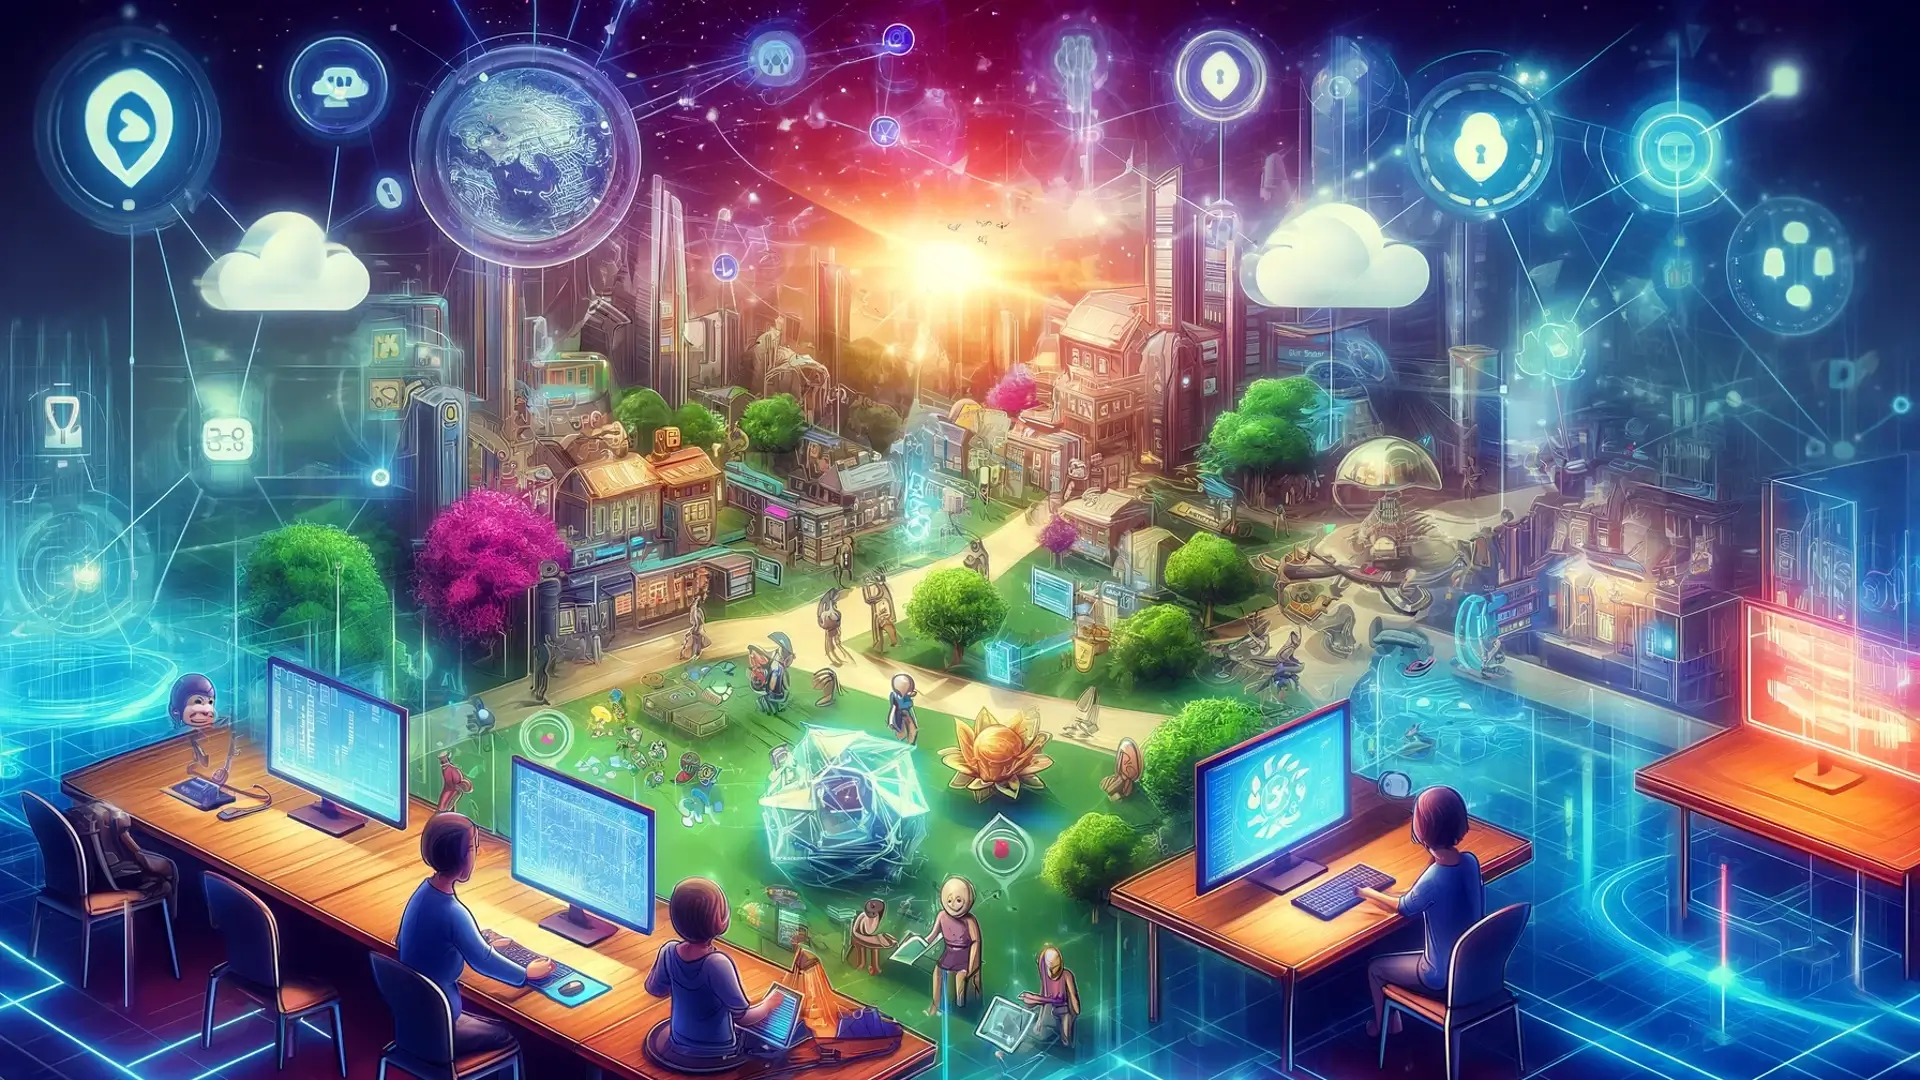 A vibrant digital landscape depicting a futuristic decentralized gaming environment where developers and gamers collaborate seamlessly. The scene includes elements of blockchain technology and smart contracts, highlighting the decentralized aspect of the ecosystem. Diverse characters work together on various screens and digital interfaces, emphasizing a community-driven atmosphere.